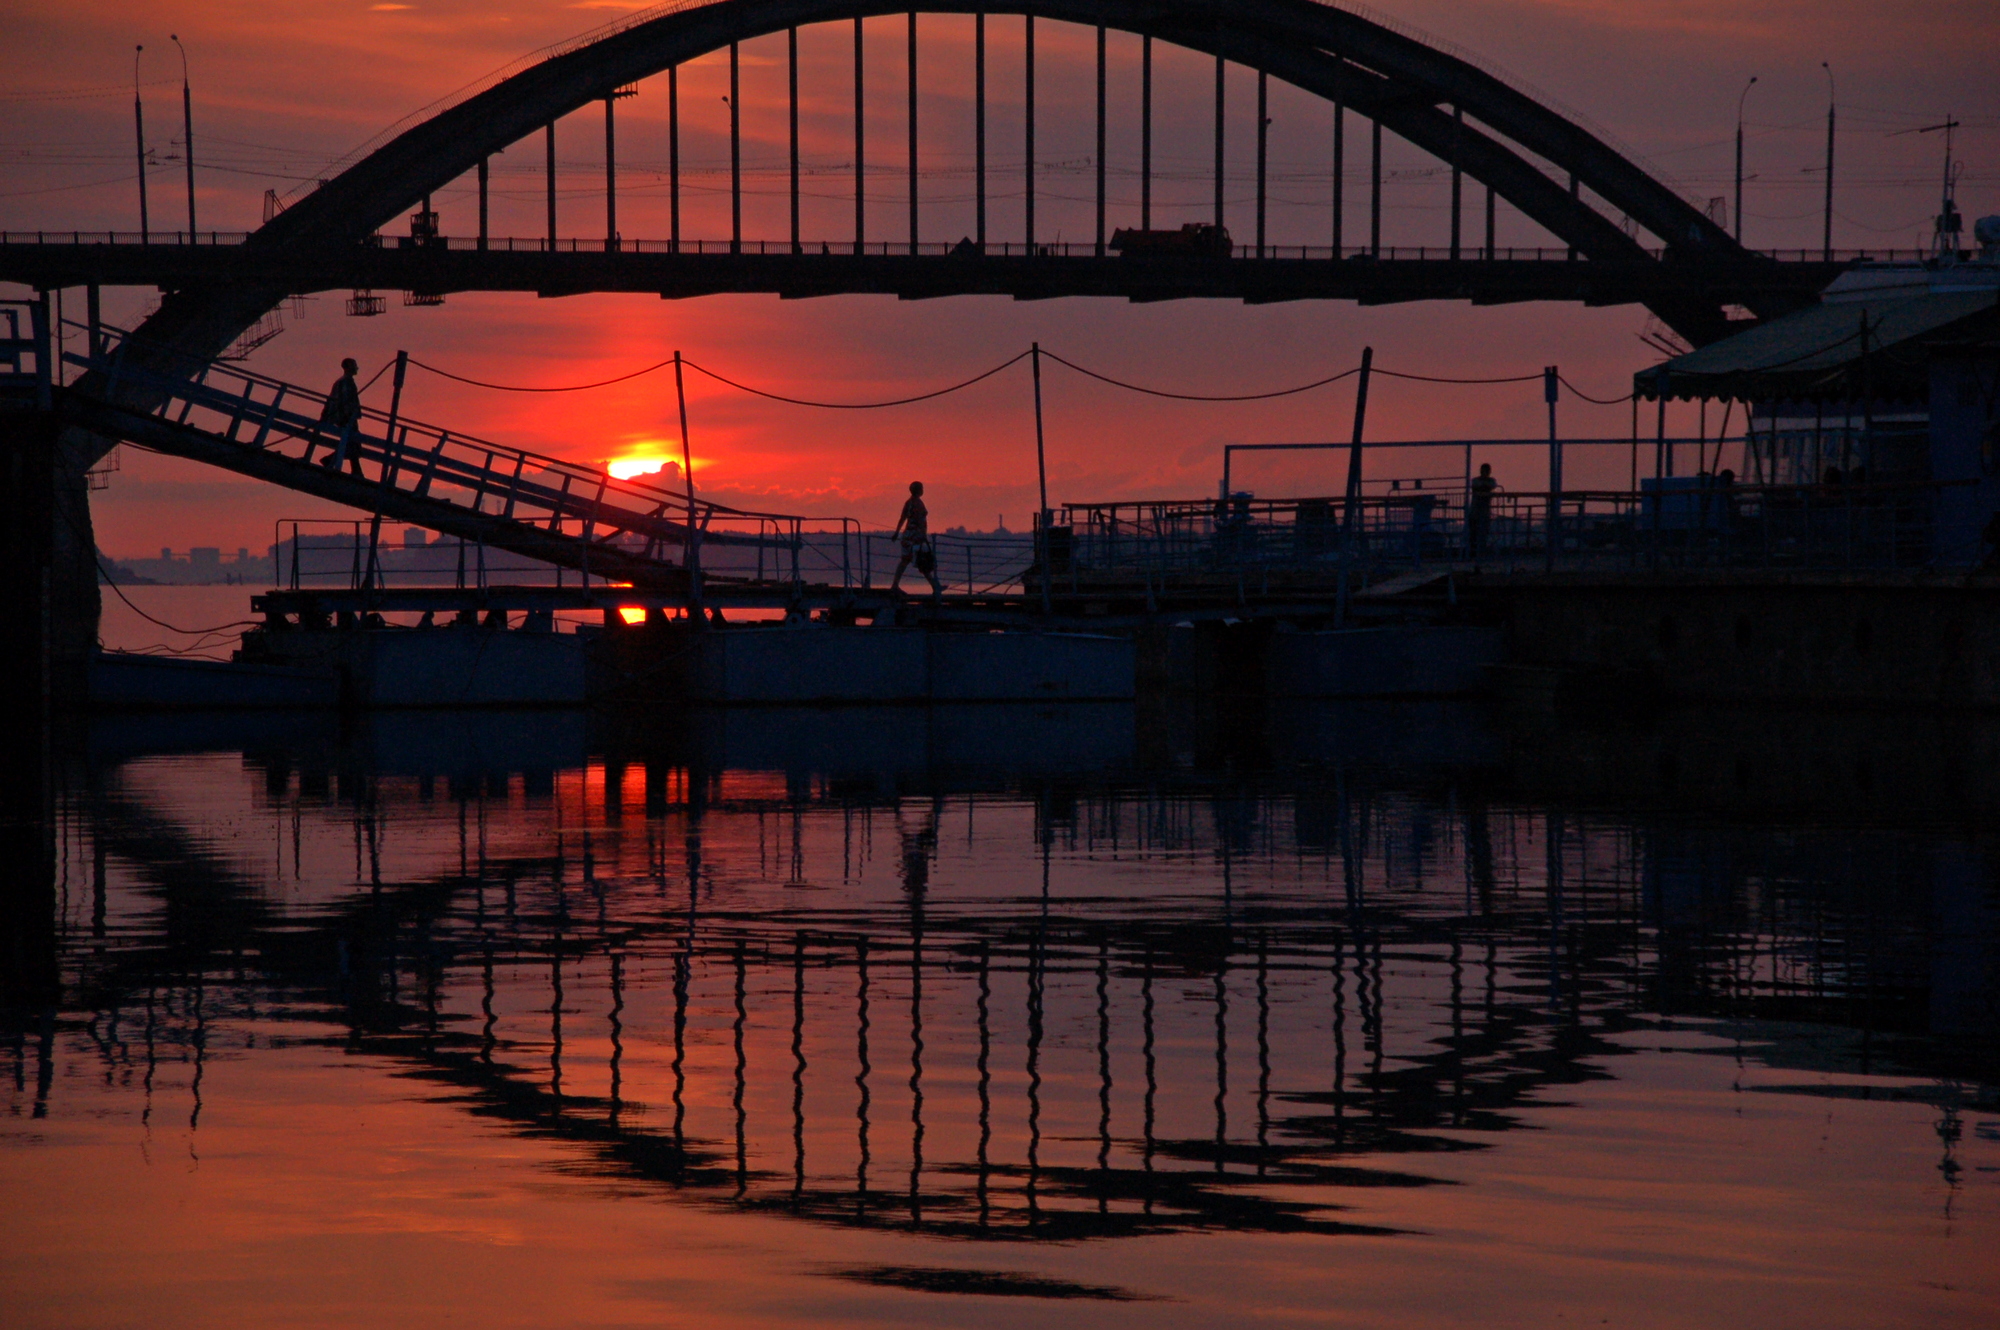 General 2000x1330 architecture building photography bridge river reflection sunset people silhouette low light